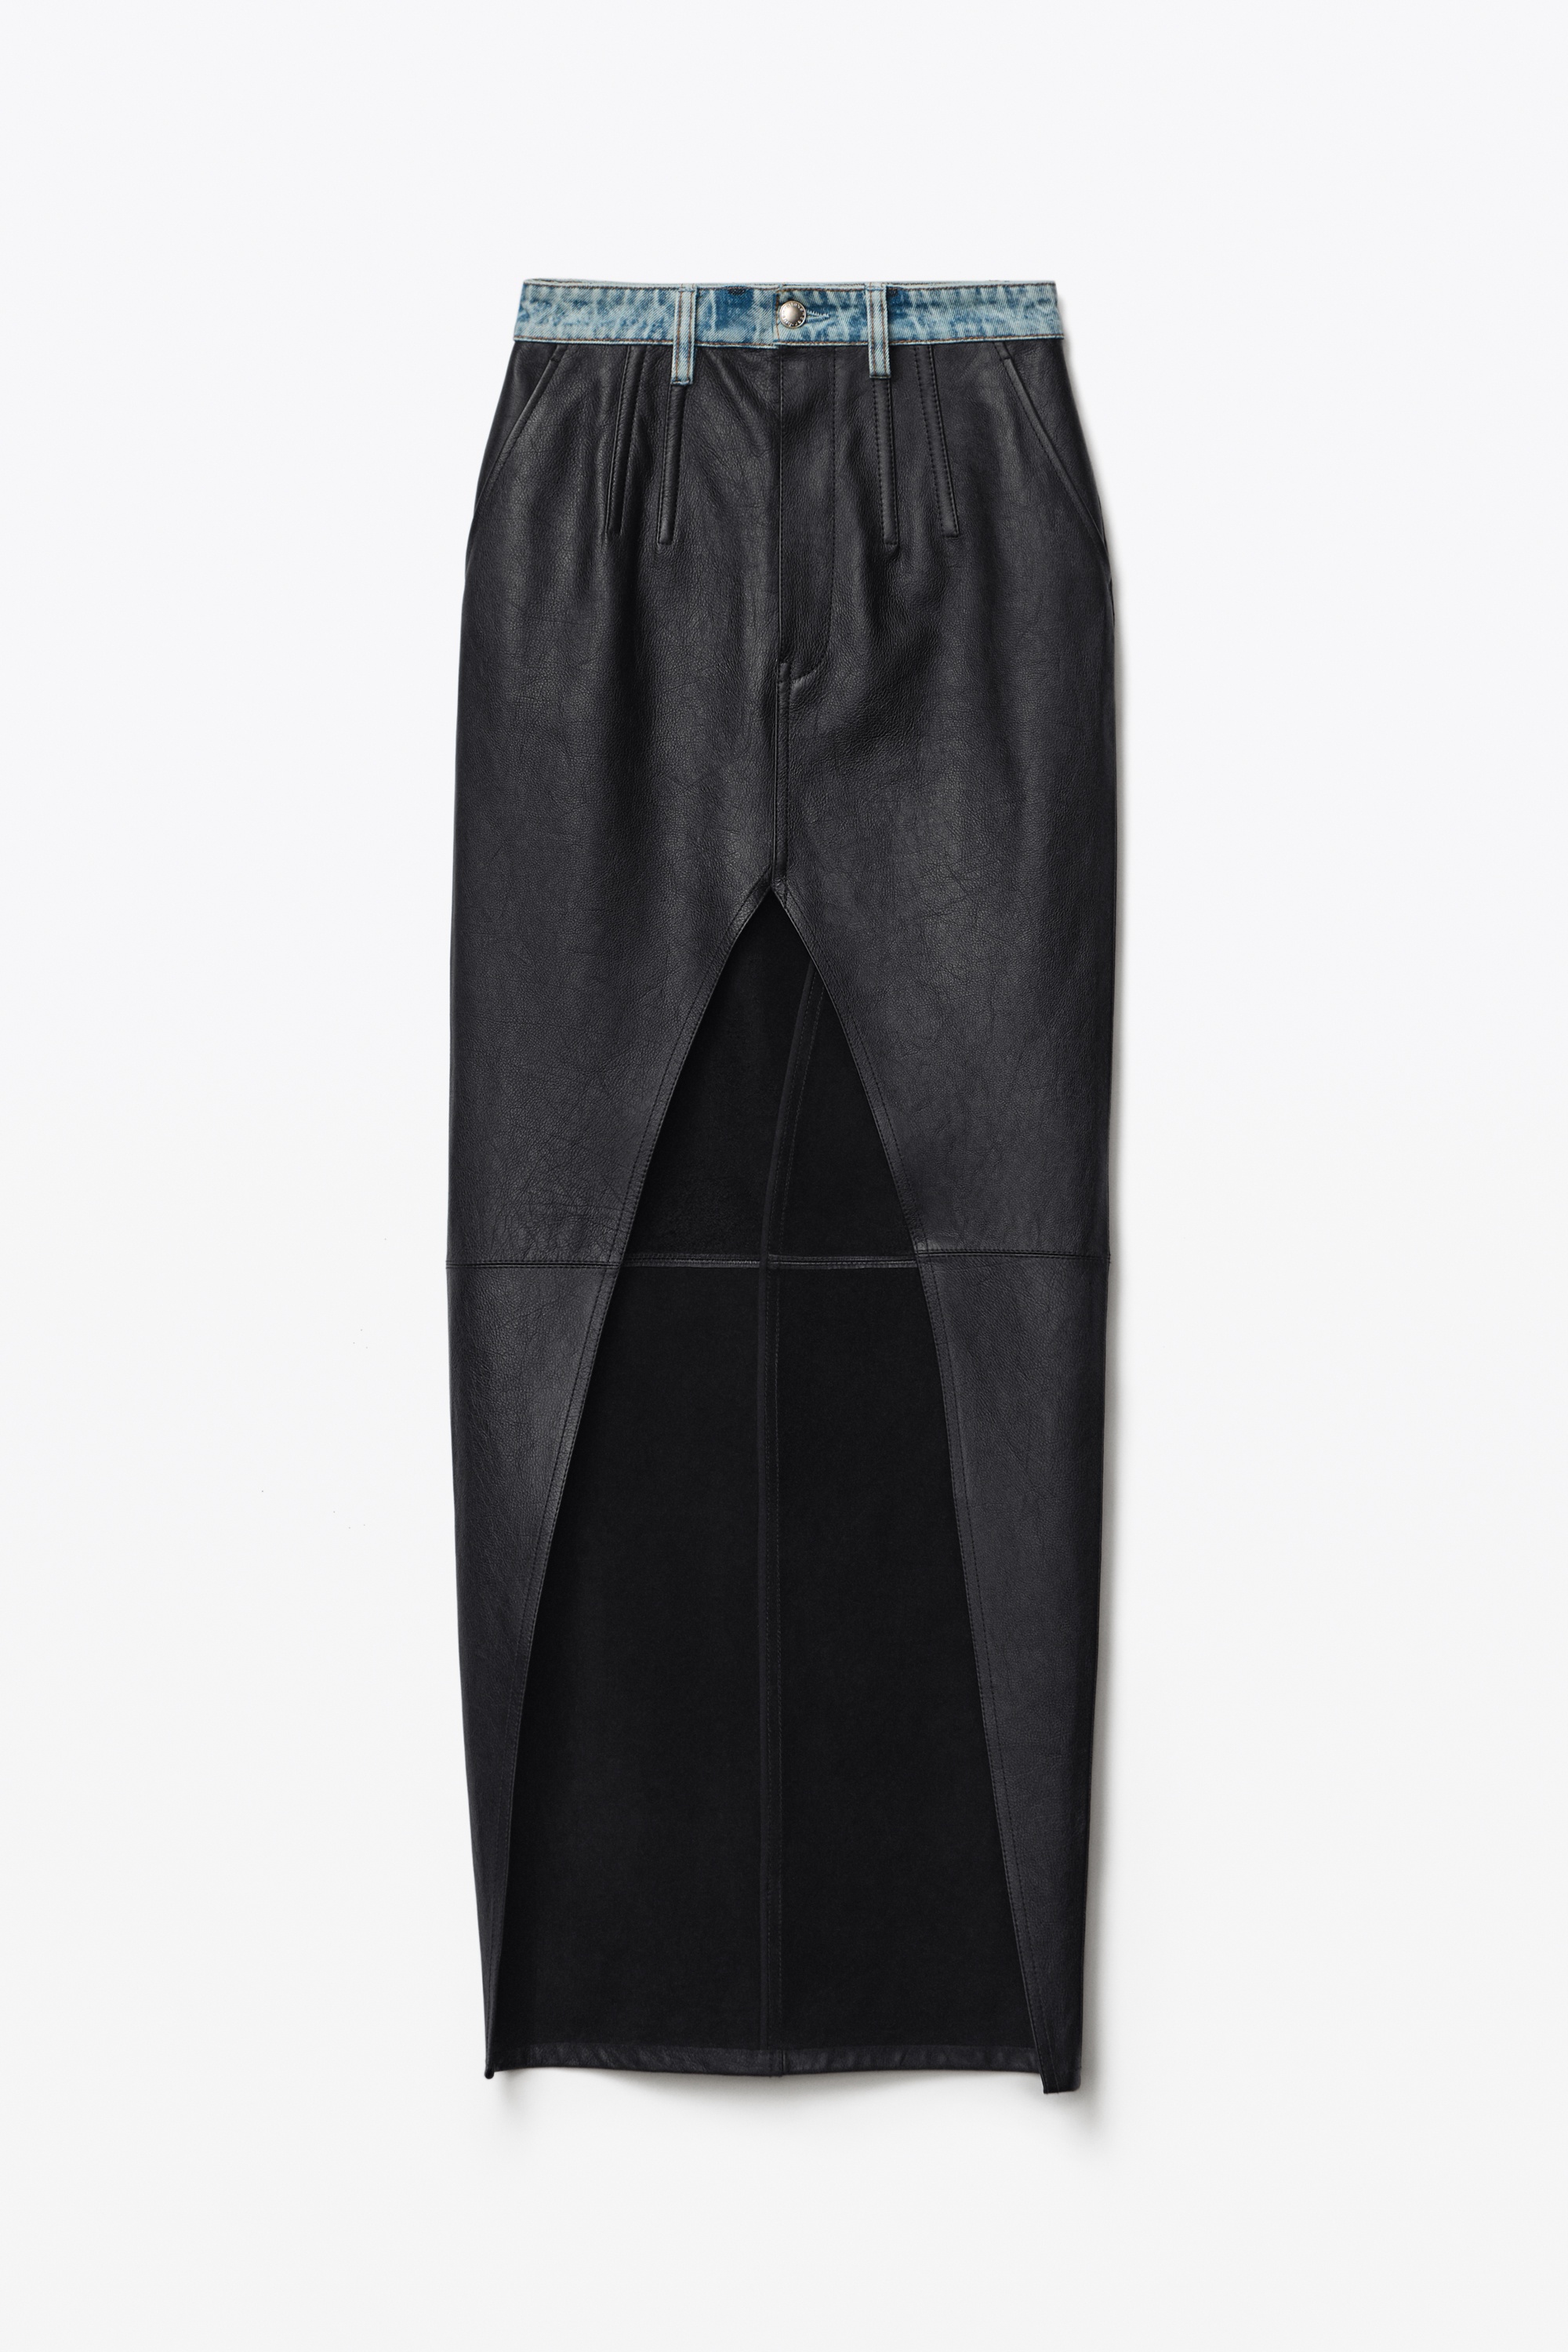 MAXI HIGH SLIT SKIRT IN CONTRAST LEATHER - 1